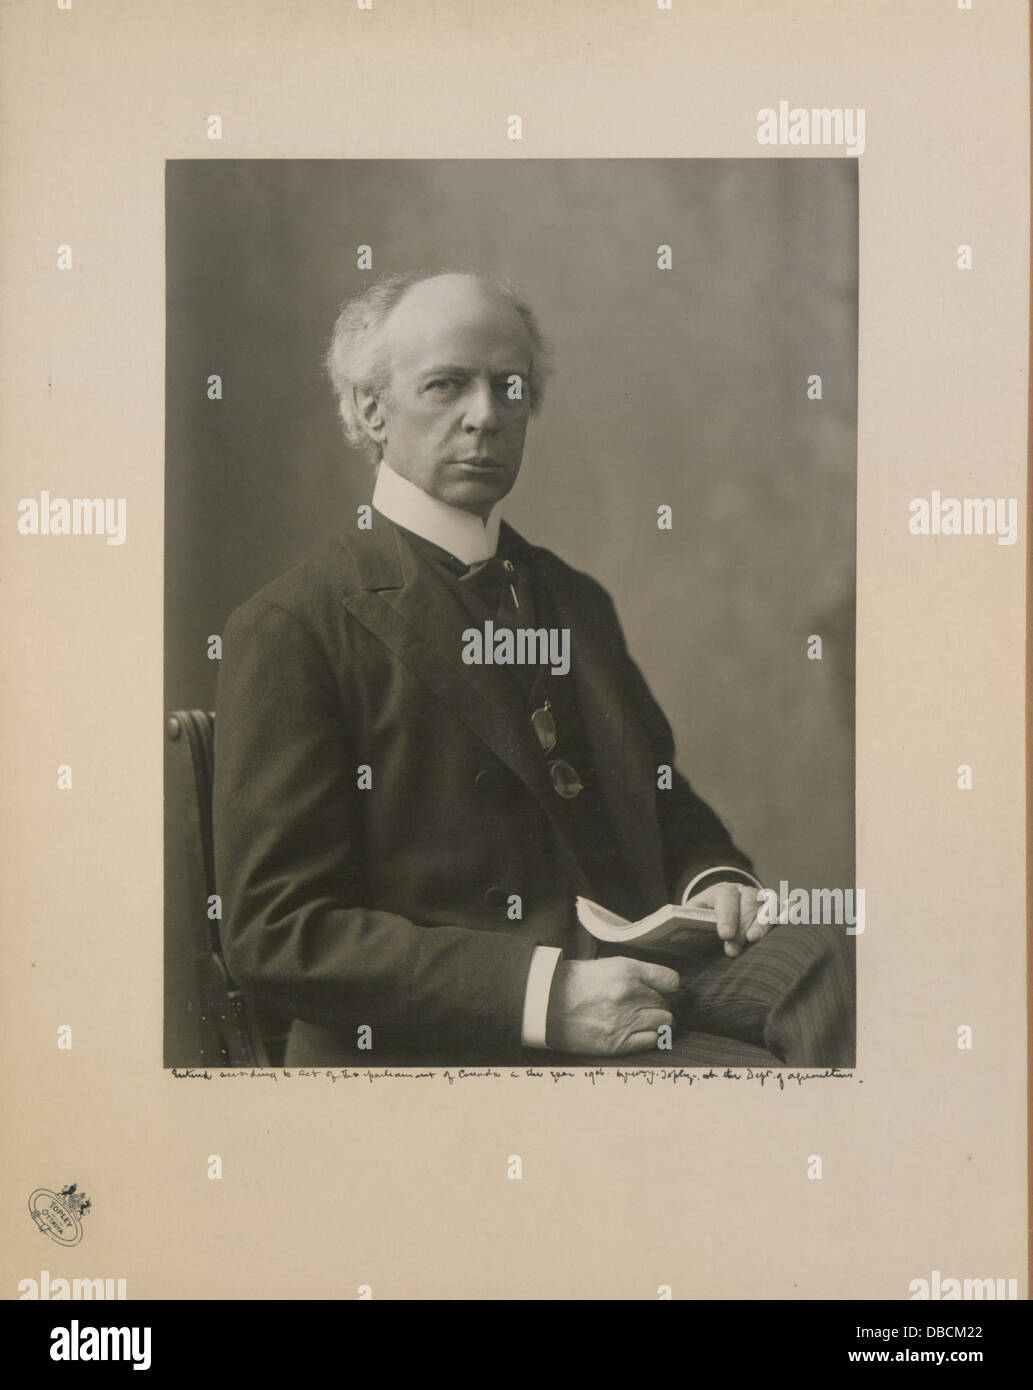 The Honourable Sir Wilfrid Laurier Photo D (HS85-10-16874) Stock Photo